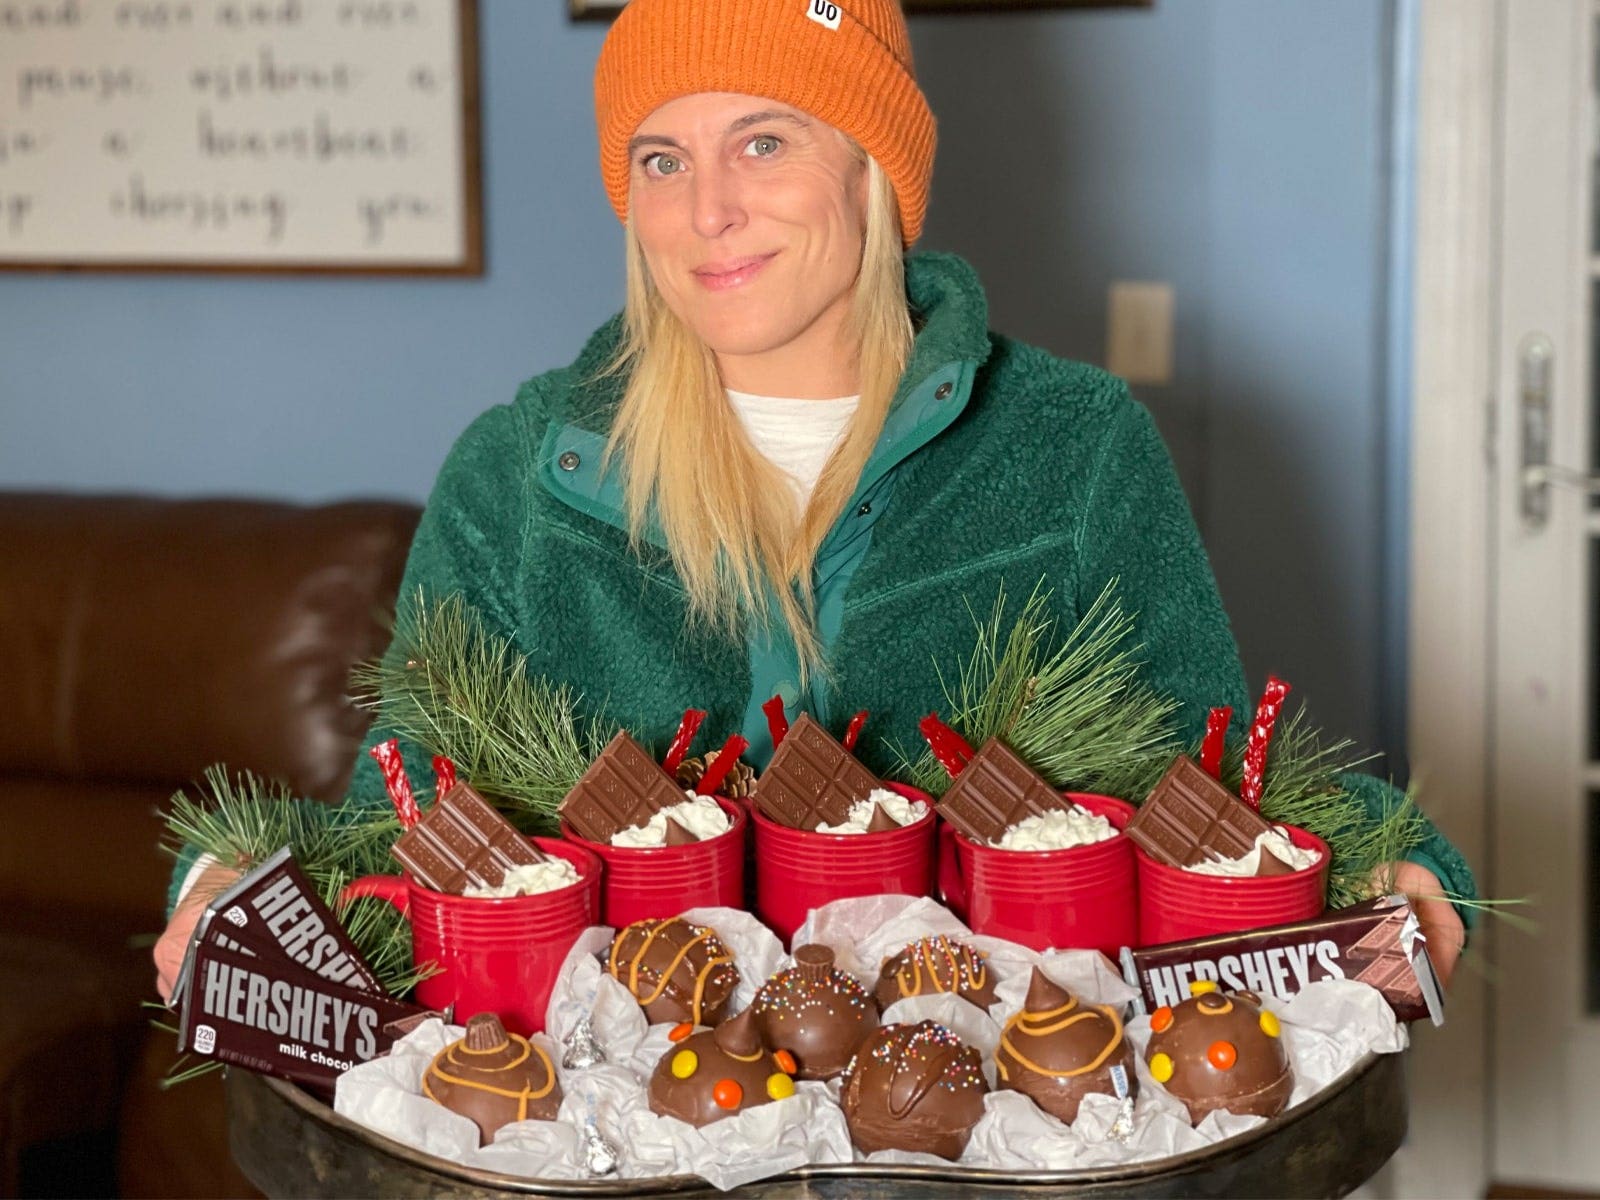 audrey mcclelland holding tray of hot cocoa bomba and filled mugs